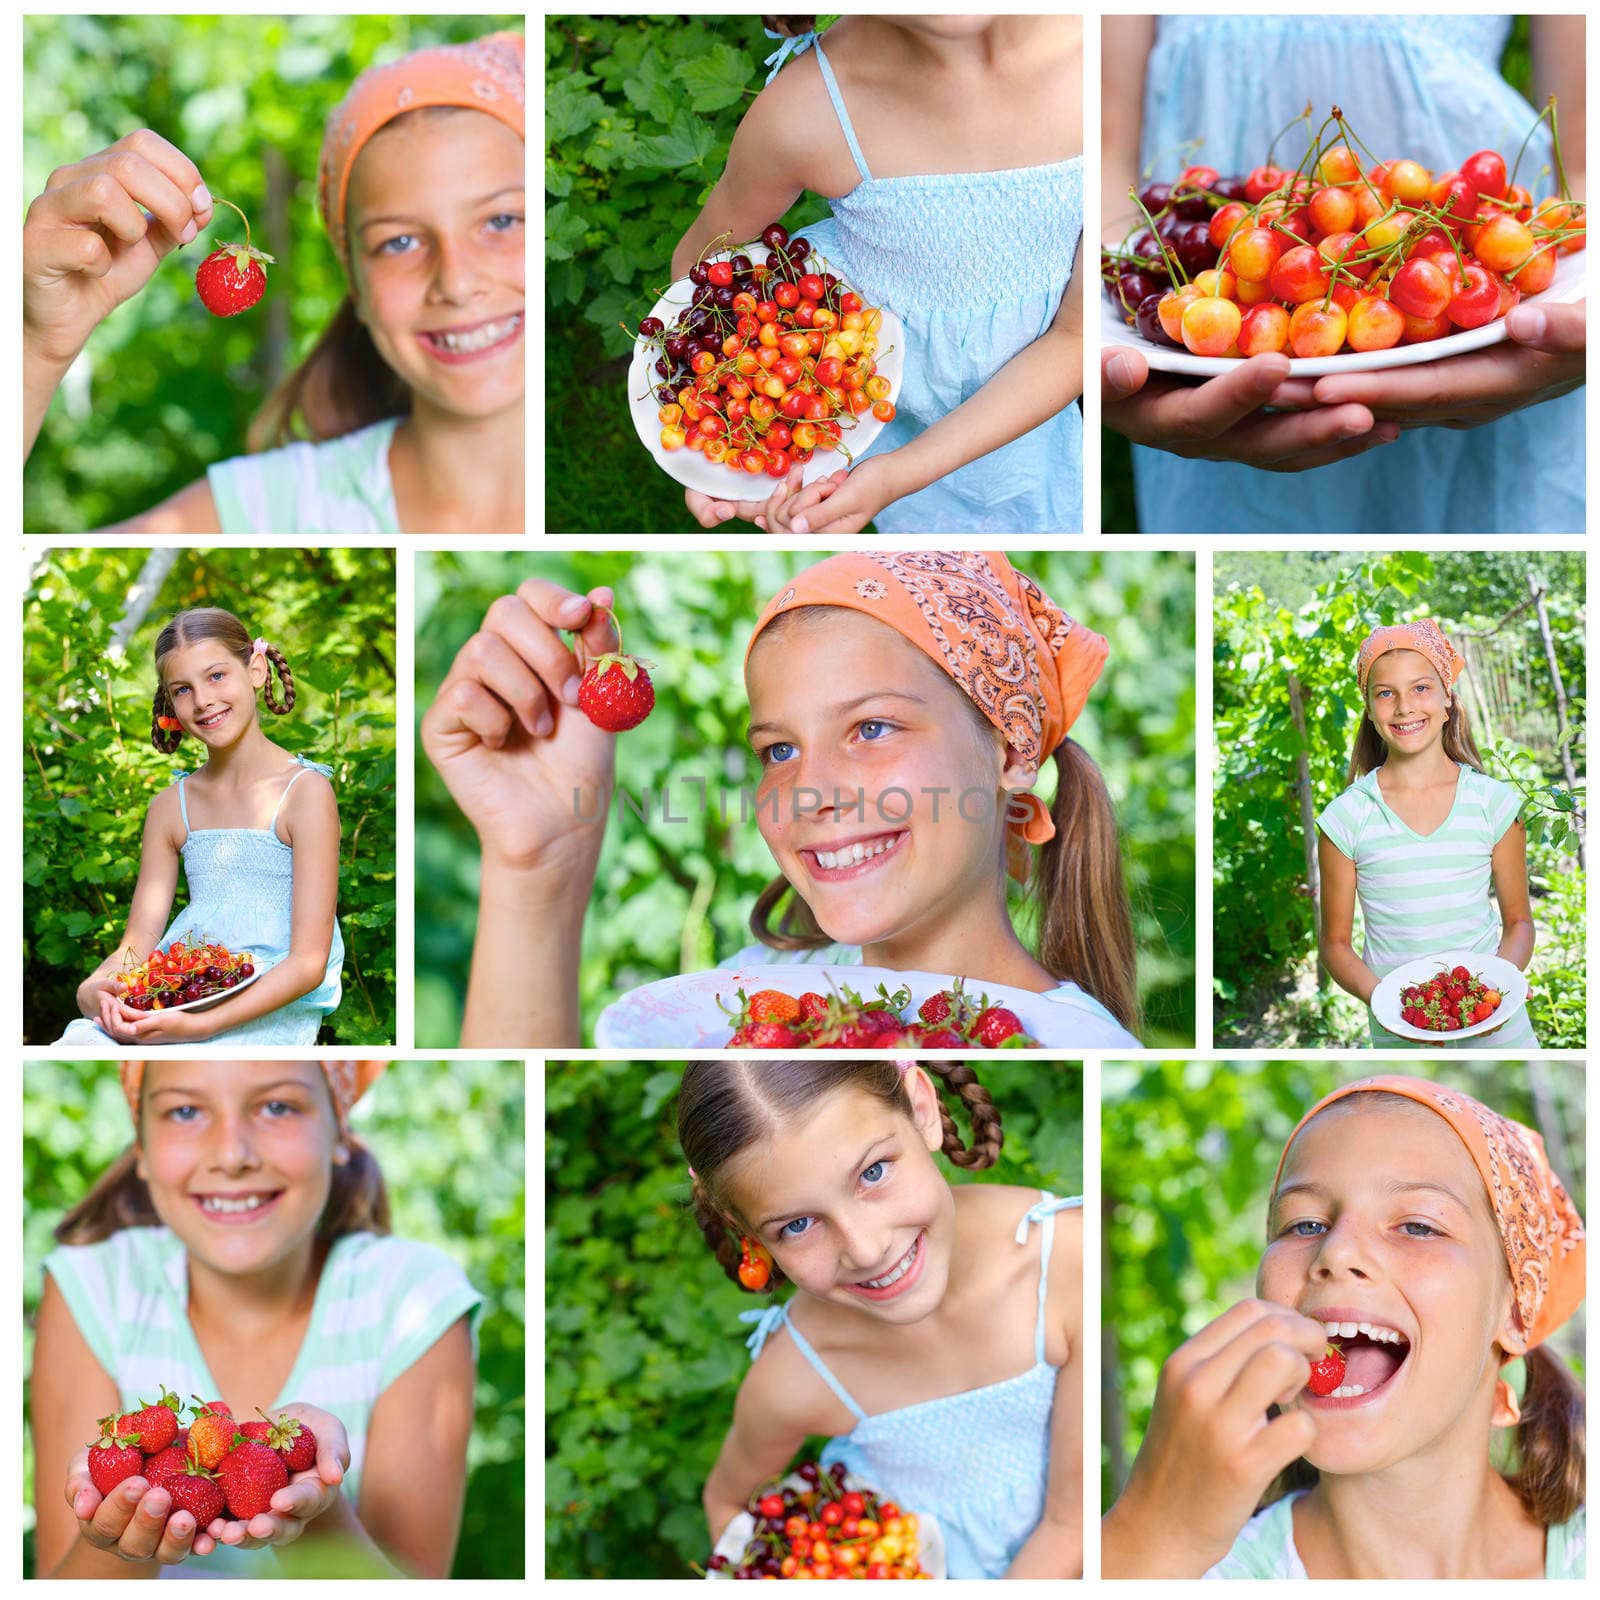 Collage of images beautiful little smiling girl eating cherries and strawberries in garden